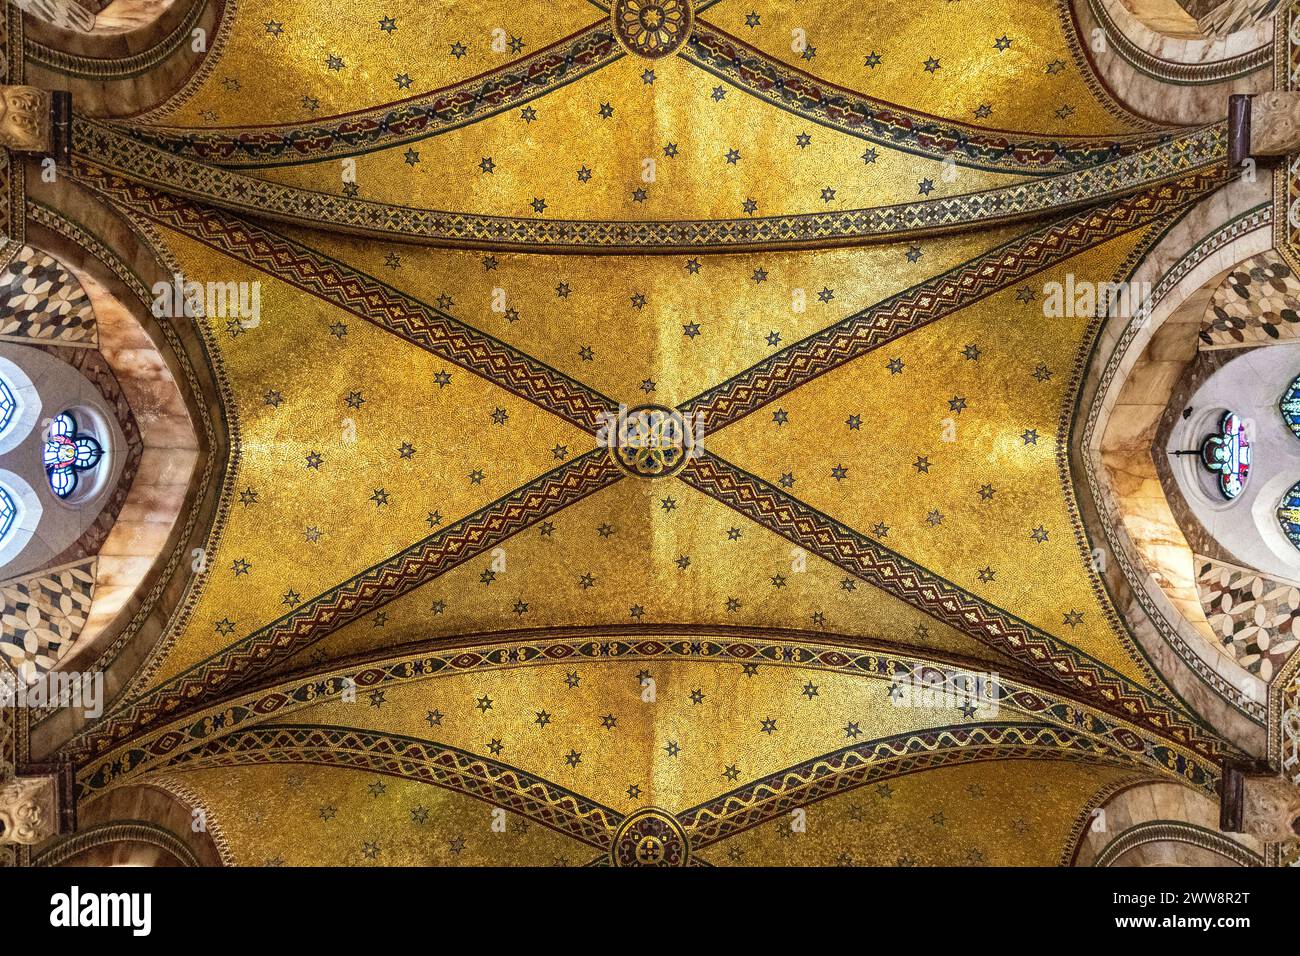 Gold mosaic ceiling of the Fitzrovia Chapel, Pearson Square, London, England Stock Photo